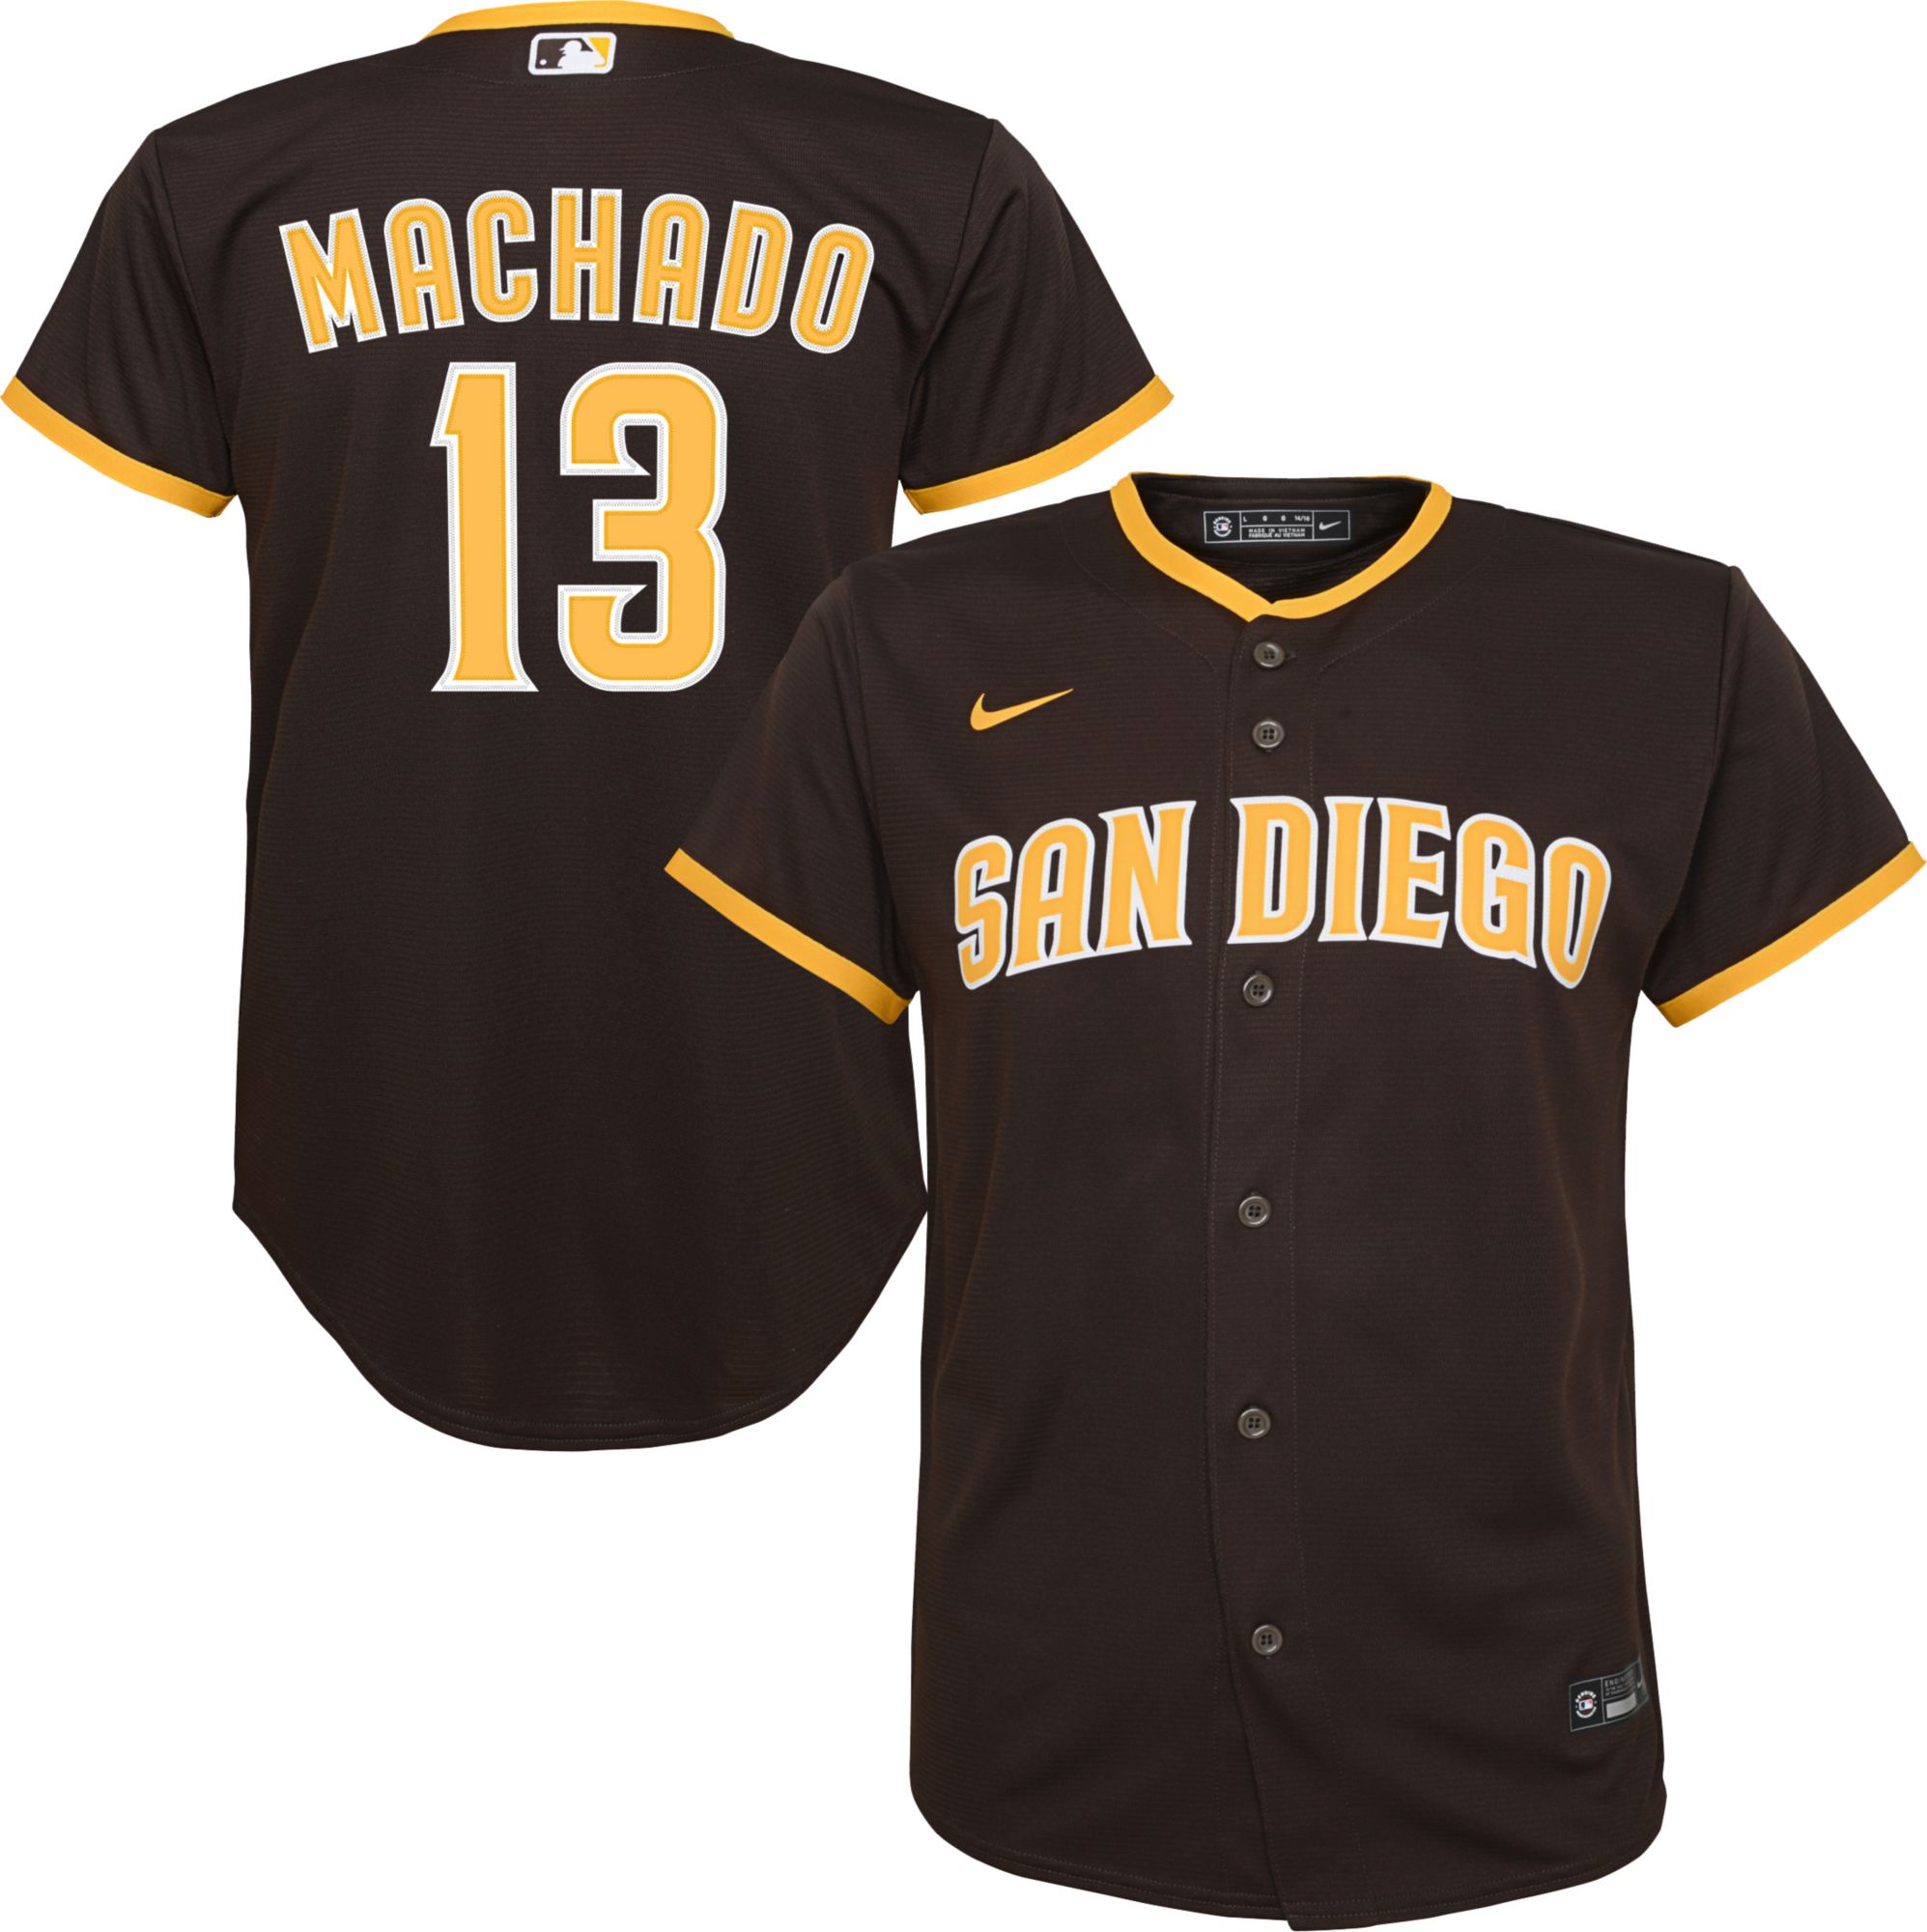 padres all star jersey